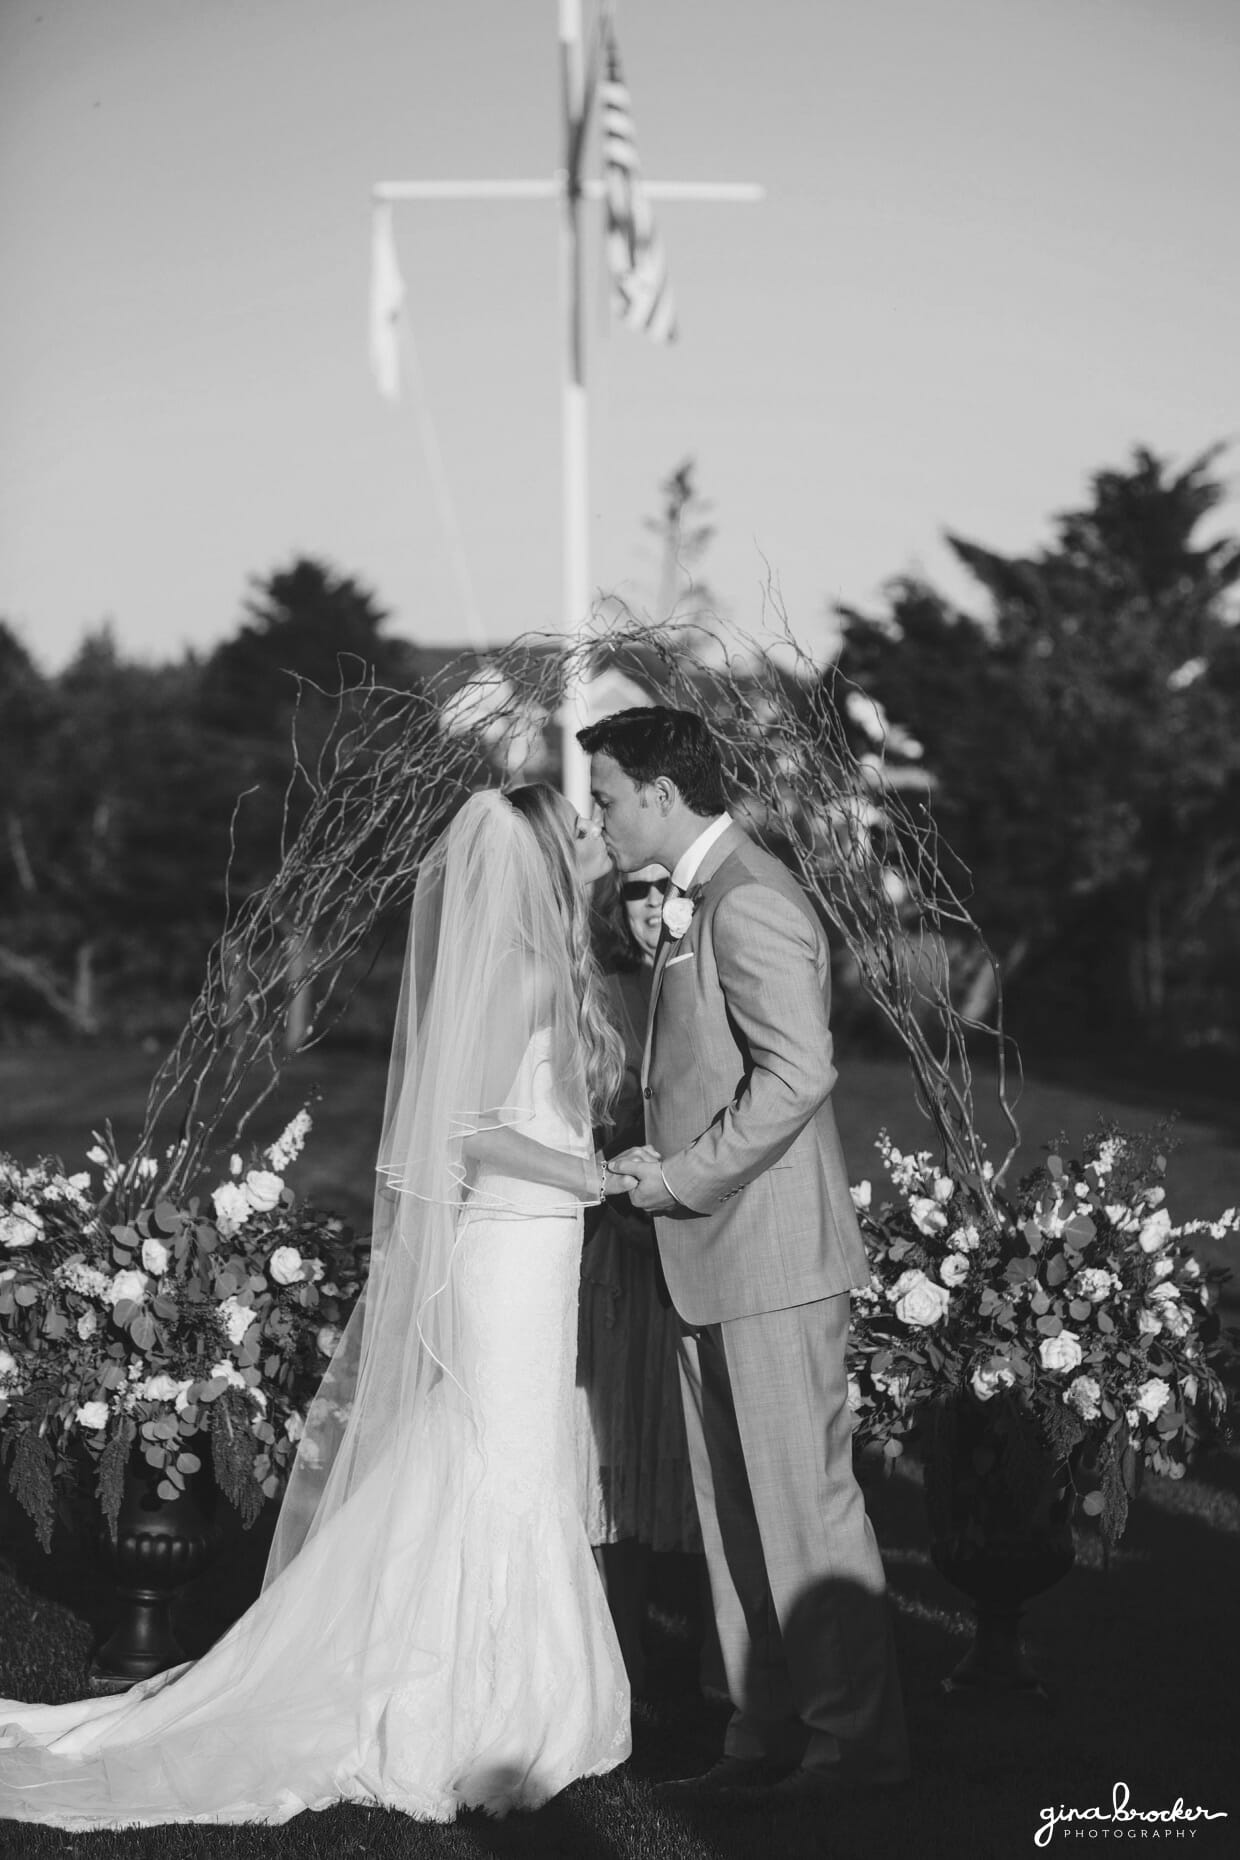 The bride and groom share their first kiss as husband and wife during their sunny outdoor wedding ceremony at the Westmoor Club in Nantucket, Massachusetts